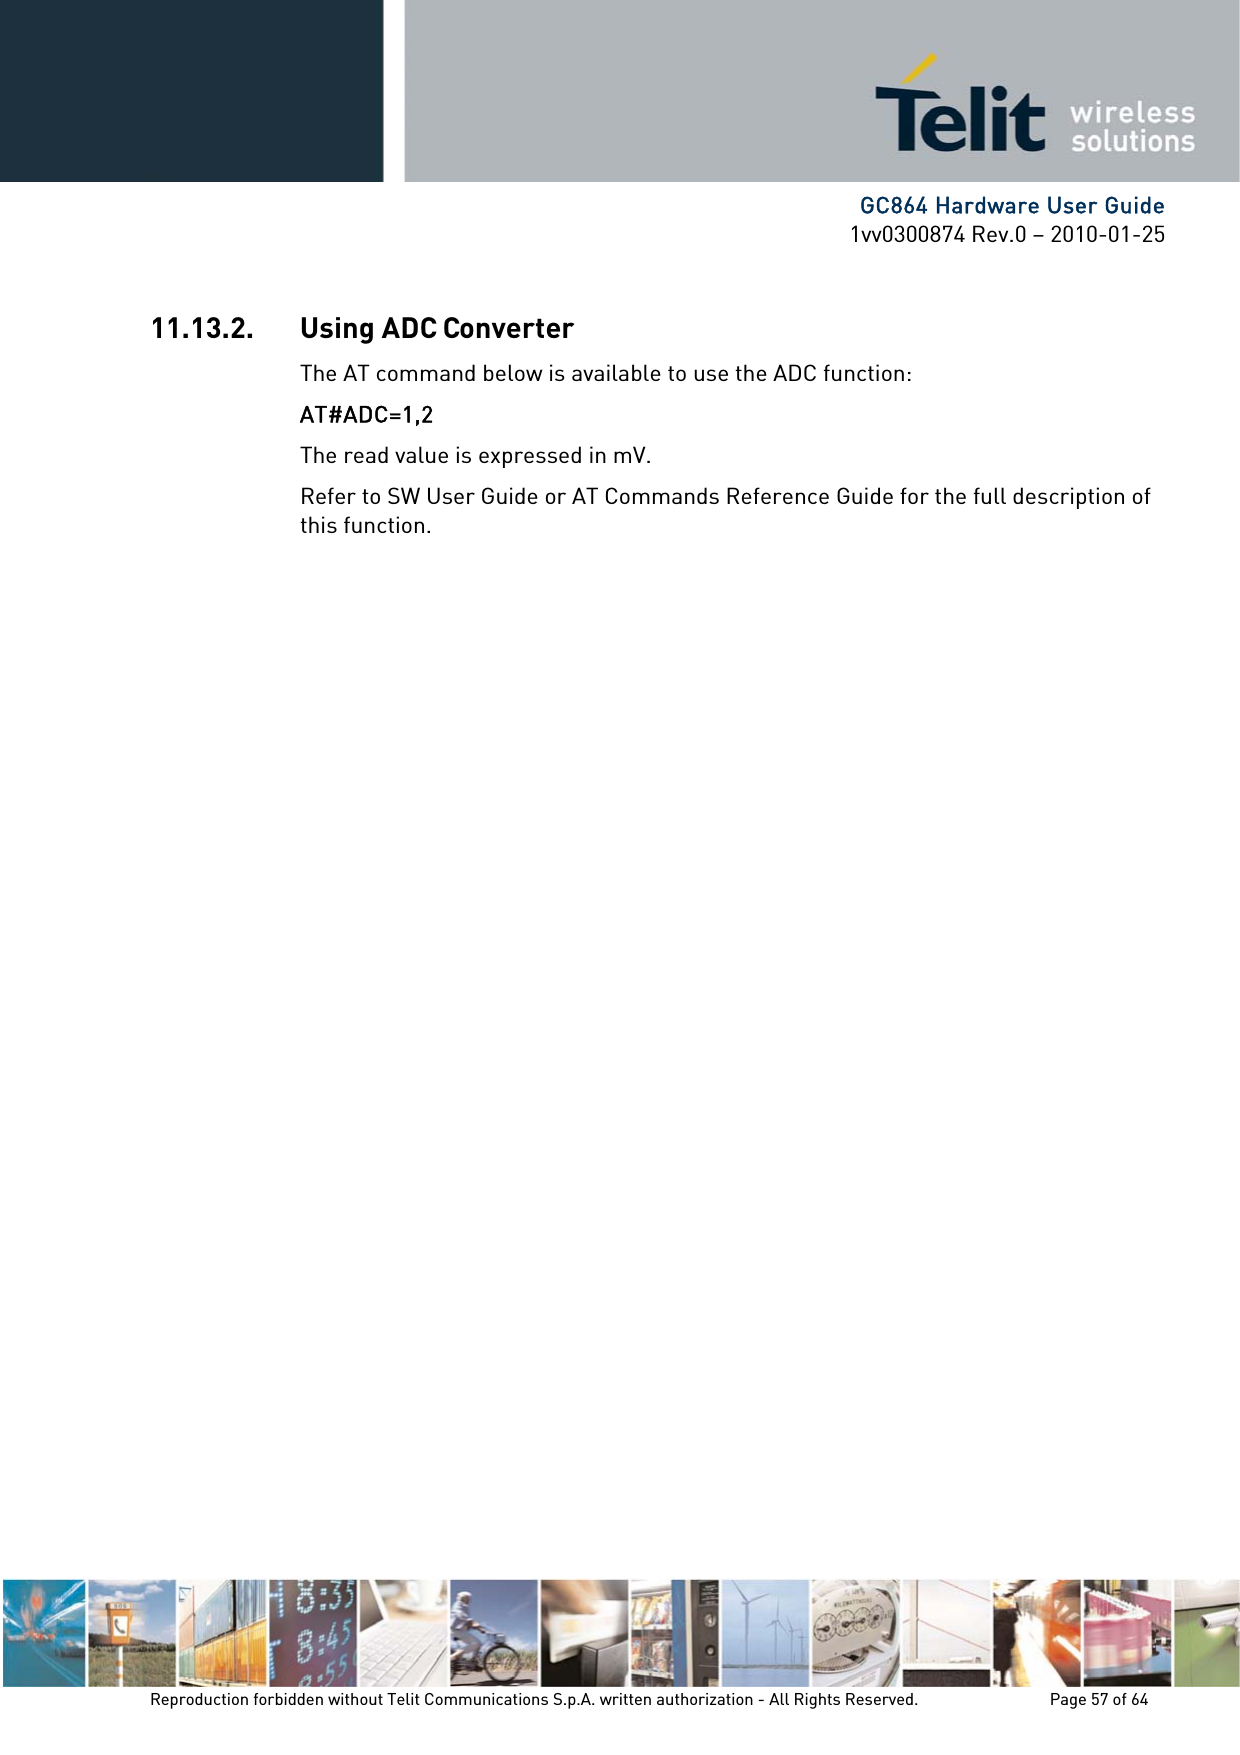      GC864 Hardware User Guide 1vv0300874 Rev.0 – 2010-01-25 Reproduction forbidden without Telit Communications S.p.A. written authorization - All Rights Reserved.    Page 57 of 64   11.13.2. Using ADC Converter The AT command below is available to use the ADC function: AT#ADC=1,2 The read value is expressed in mV. Refer to SW User Guide or AT Commands Reference Guide for the full description of this function. 